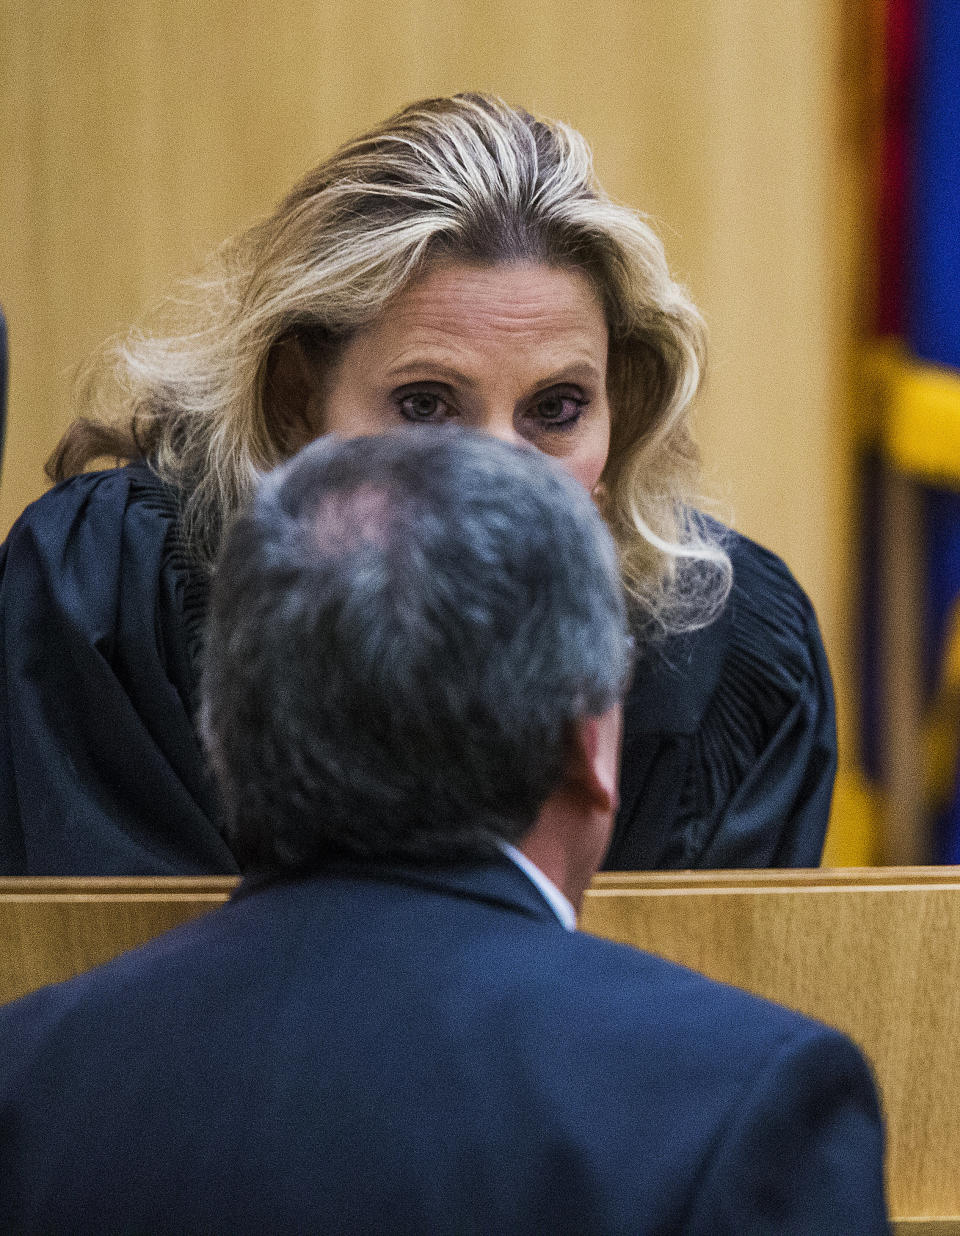 Judge Sherry Stephens and Juan Martinez during the third day of the penalty retrial on October 23, 2014.